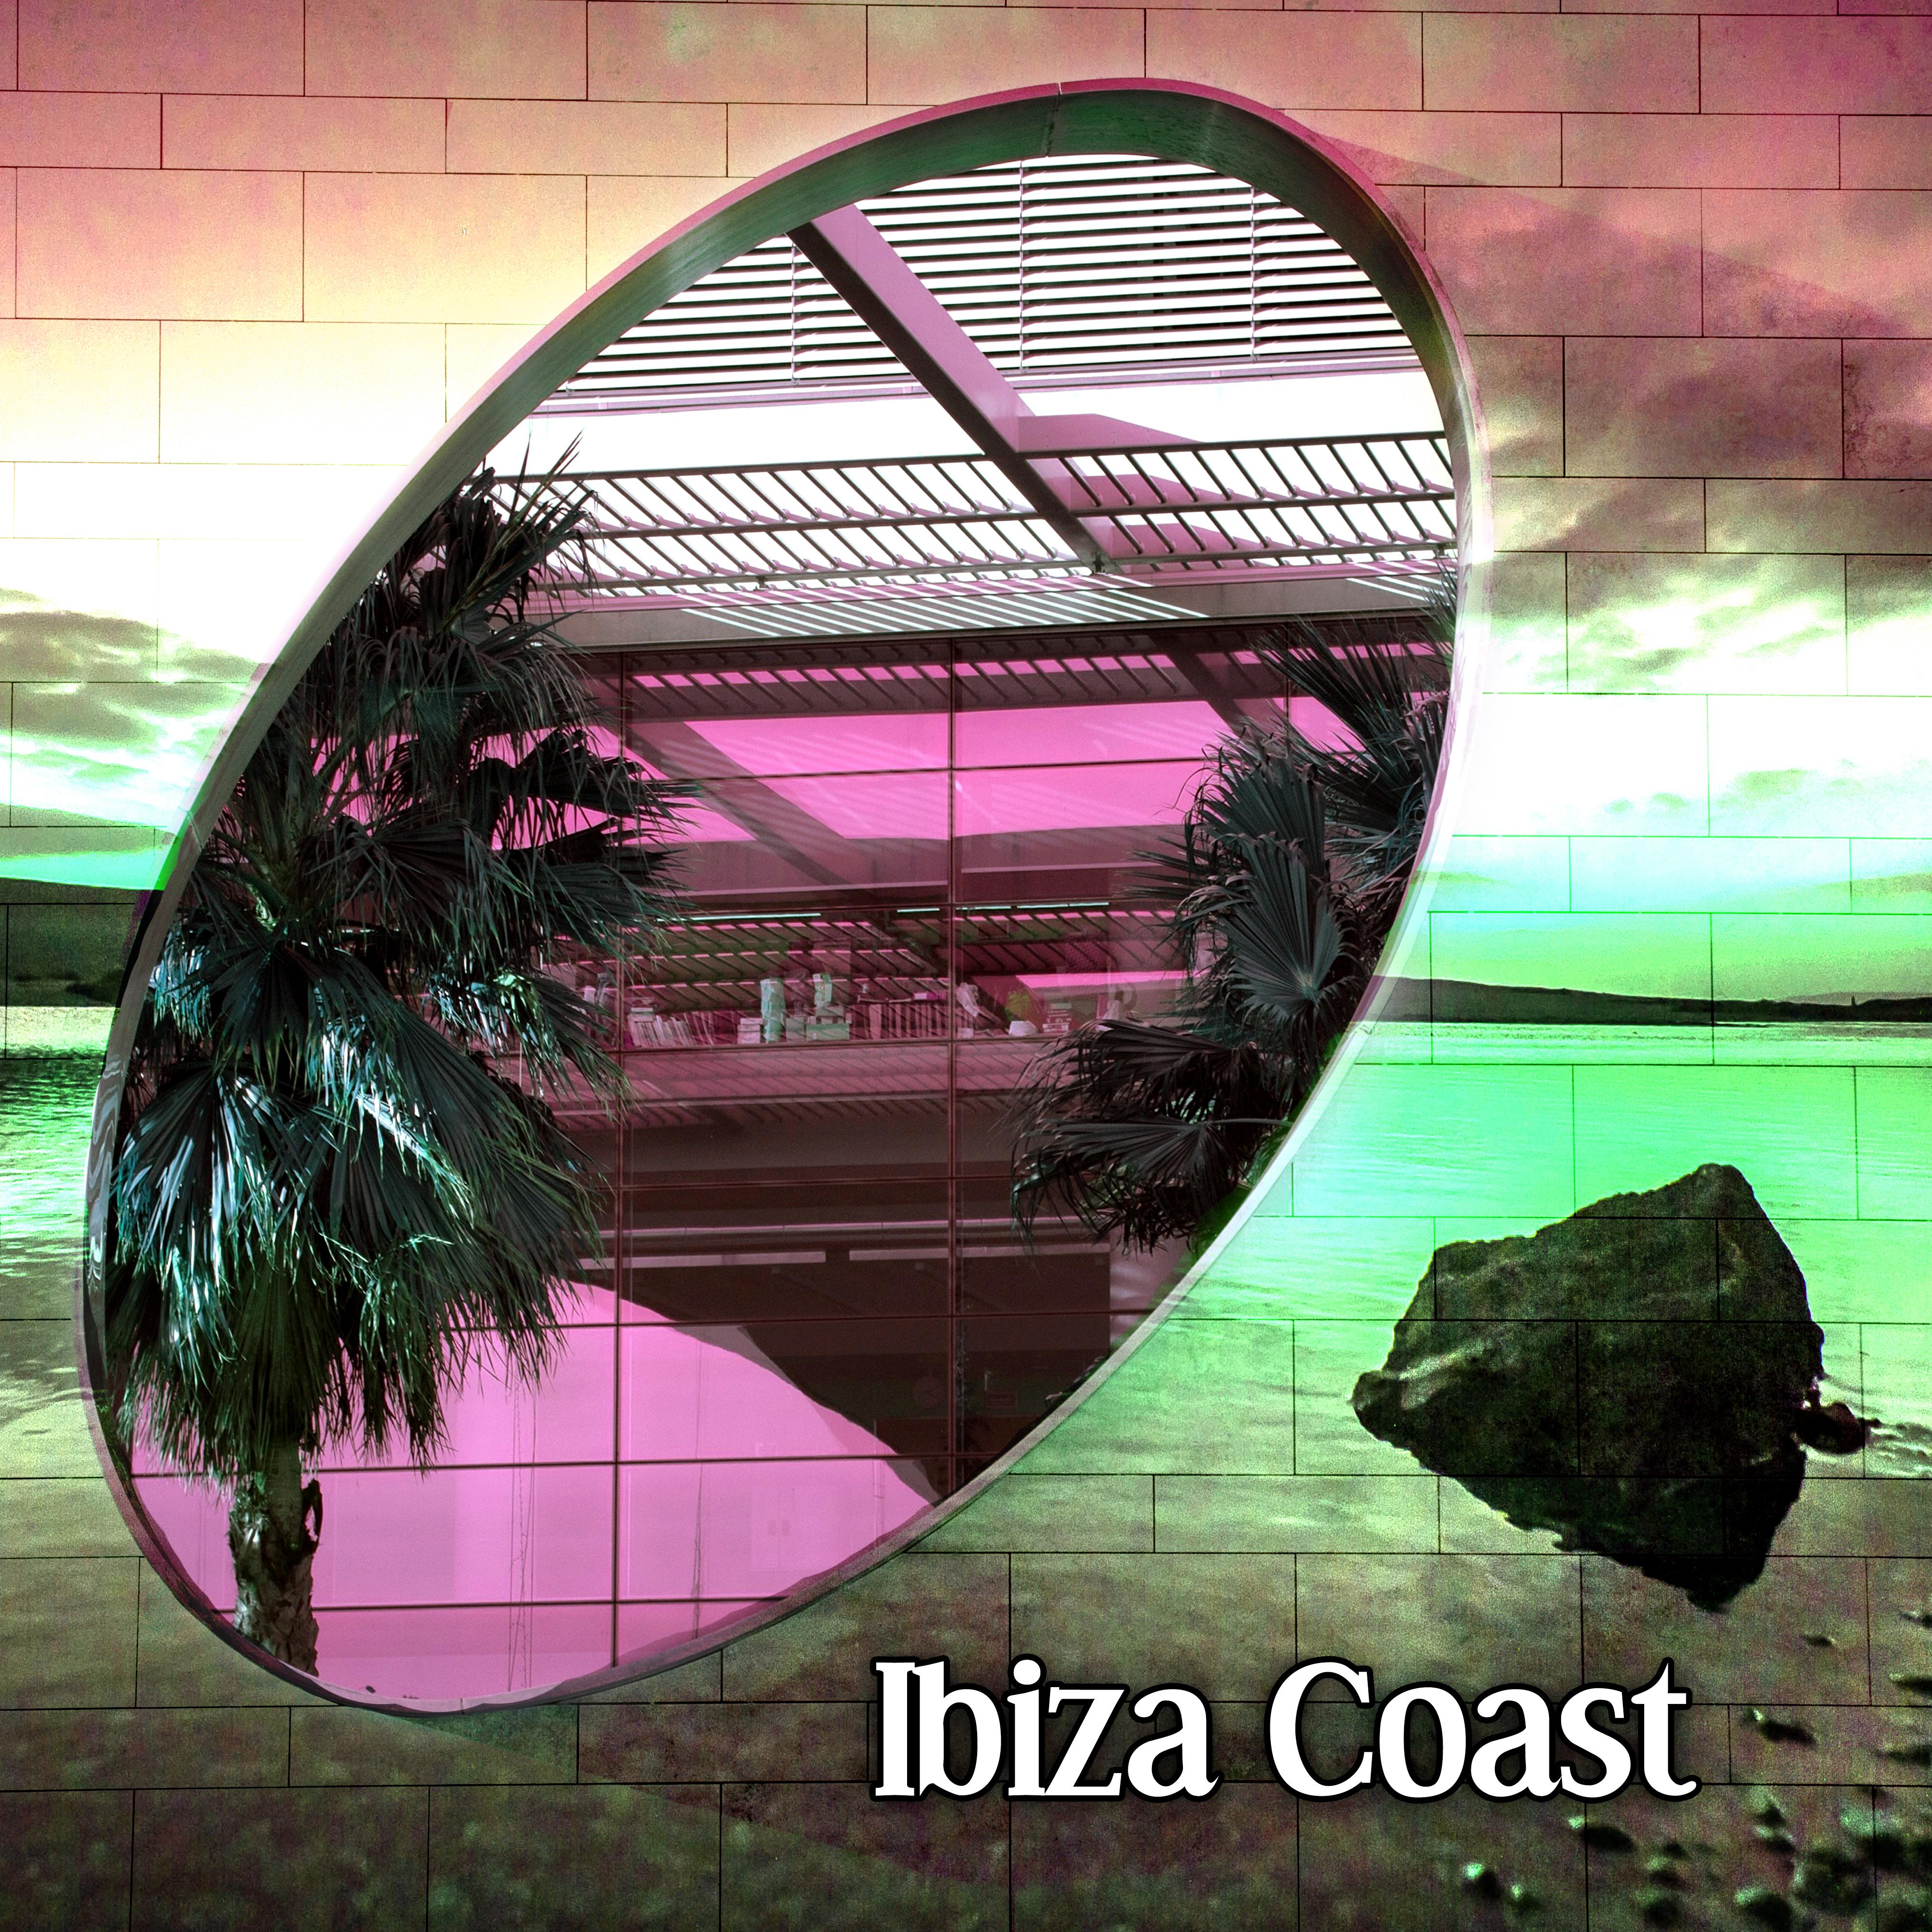 Ibiza Coast  Chillout Party, Time to Have Fun, Dance Moves, Chill  Relax, Hot Summer